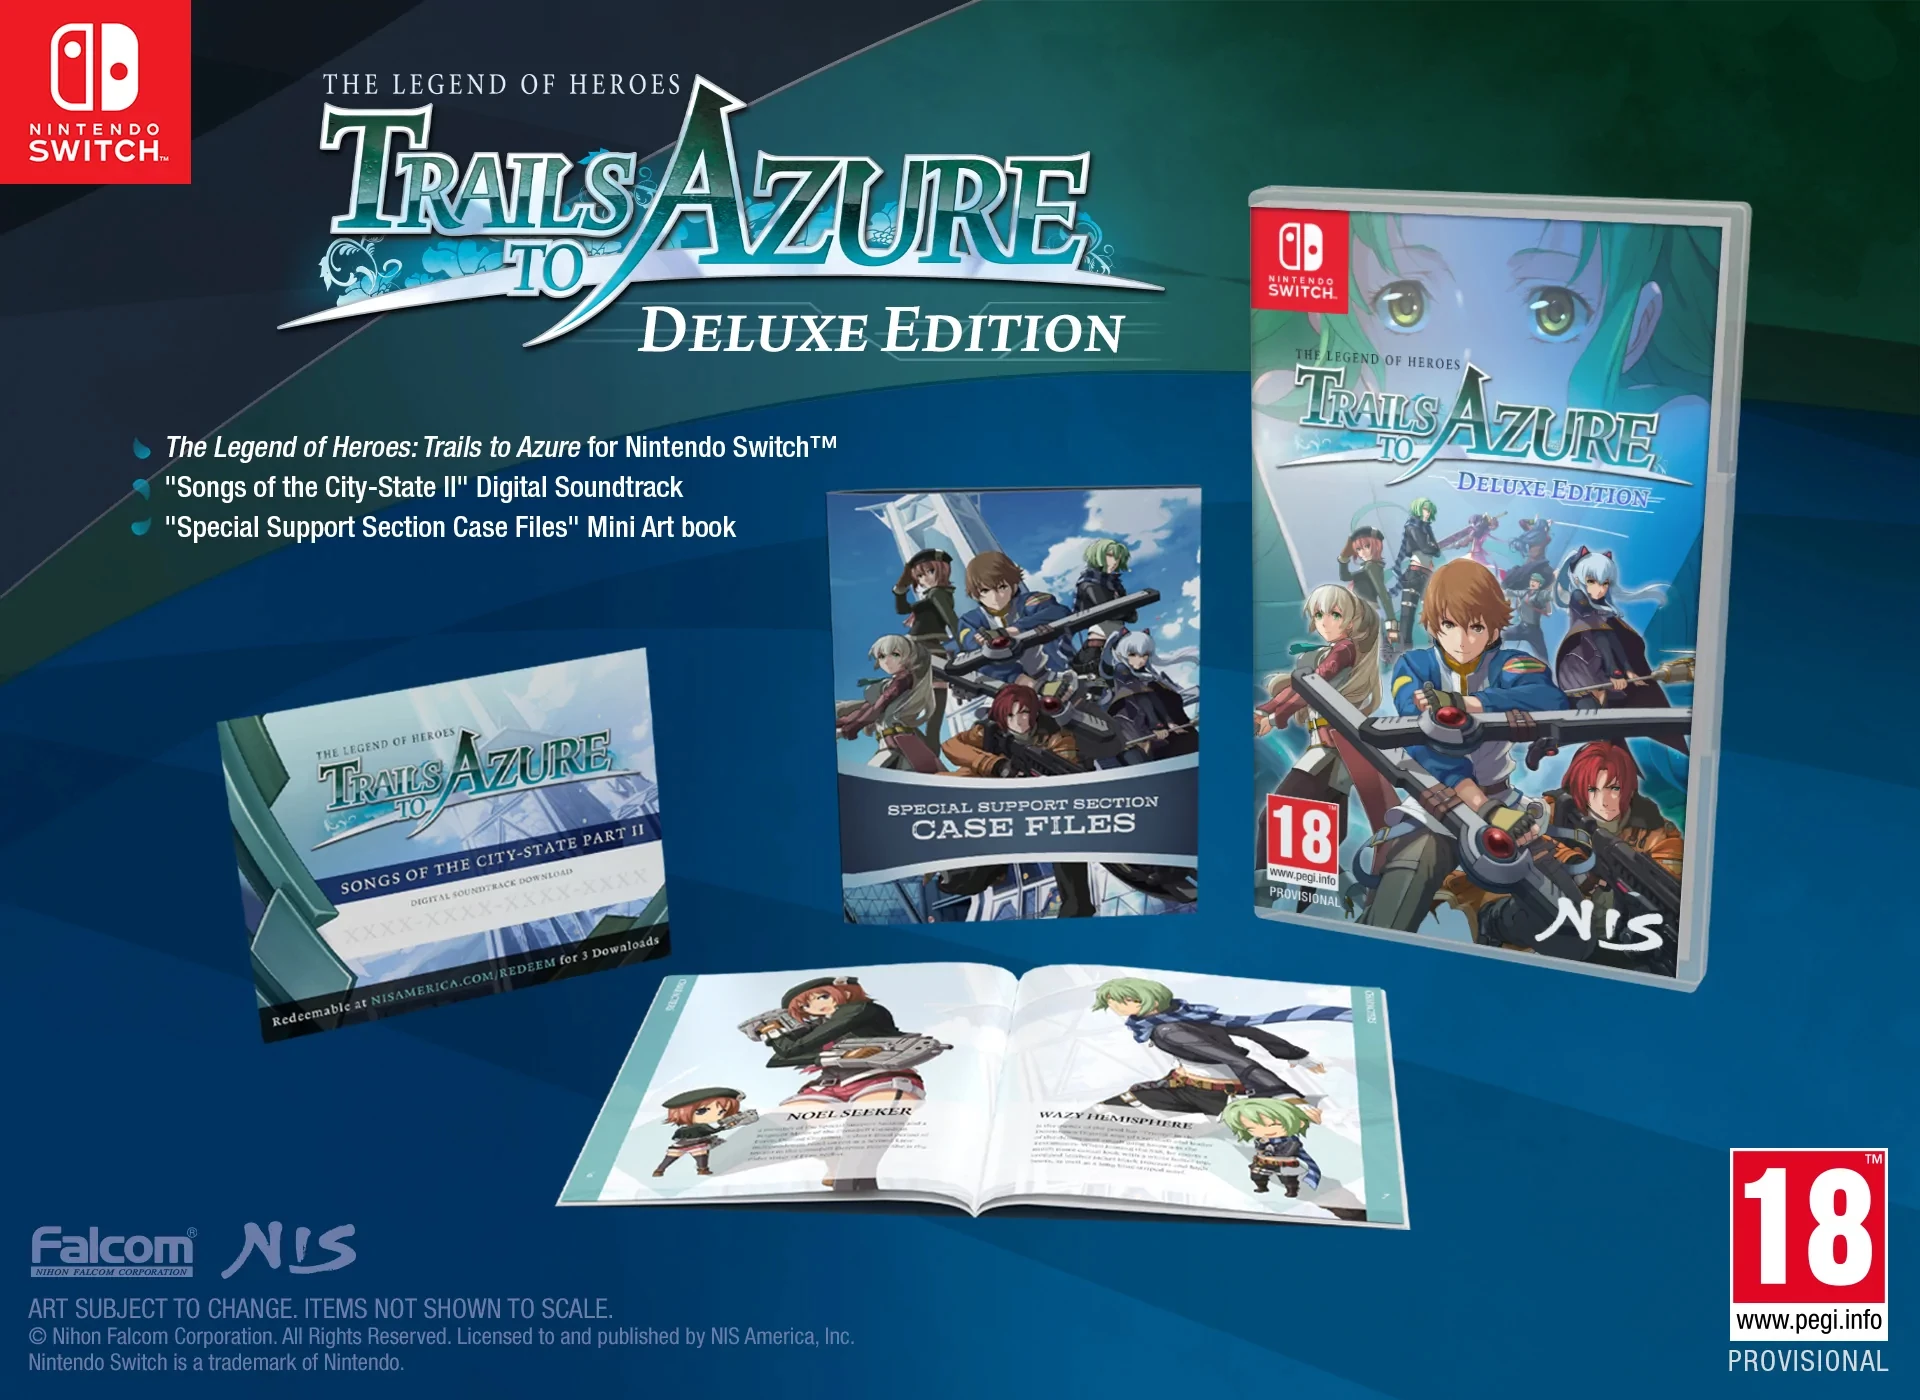 The Legend of Heroes: Trails to Azure - Deluxe Edition (Switch), NIS America